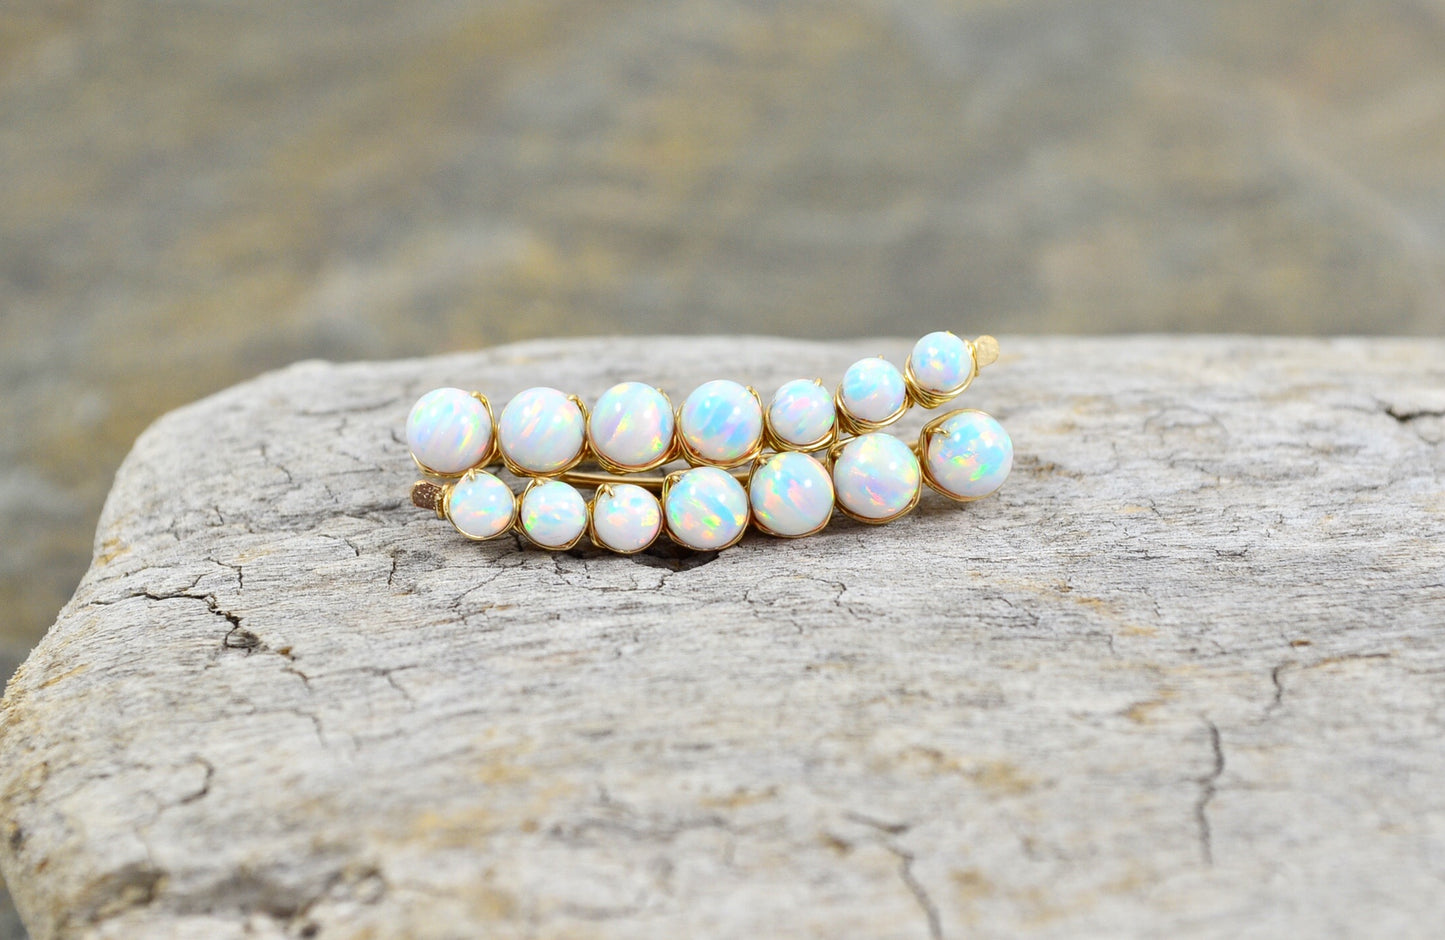 White Opal Ear Climbers, in Sterling Silver or 14k Gold Filled